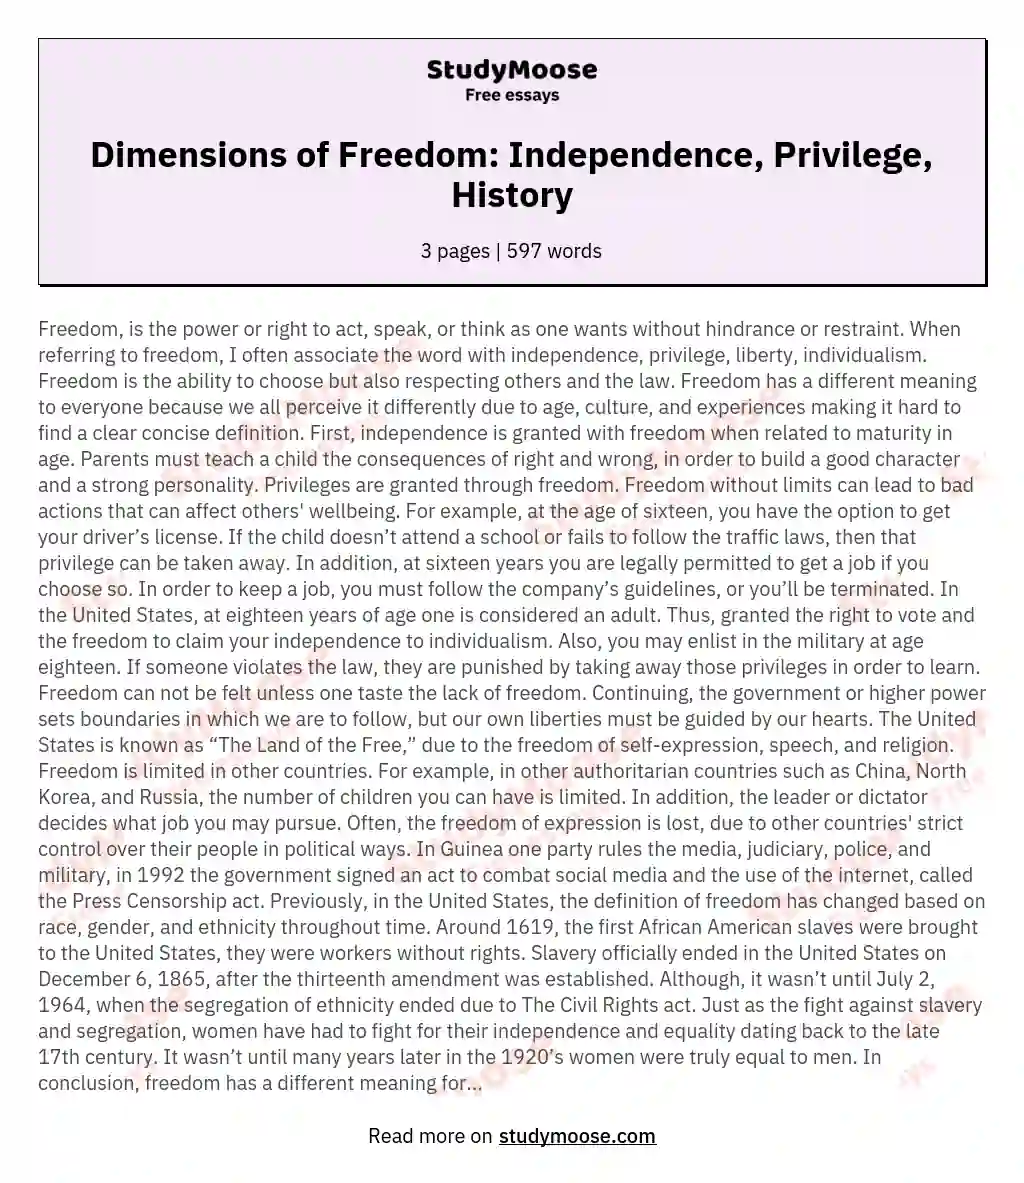 essay about freedom and independence